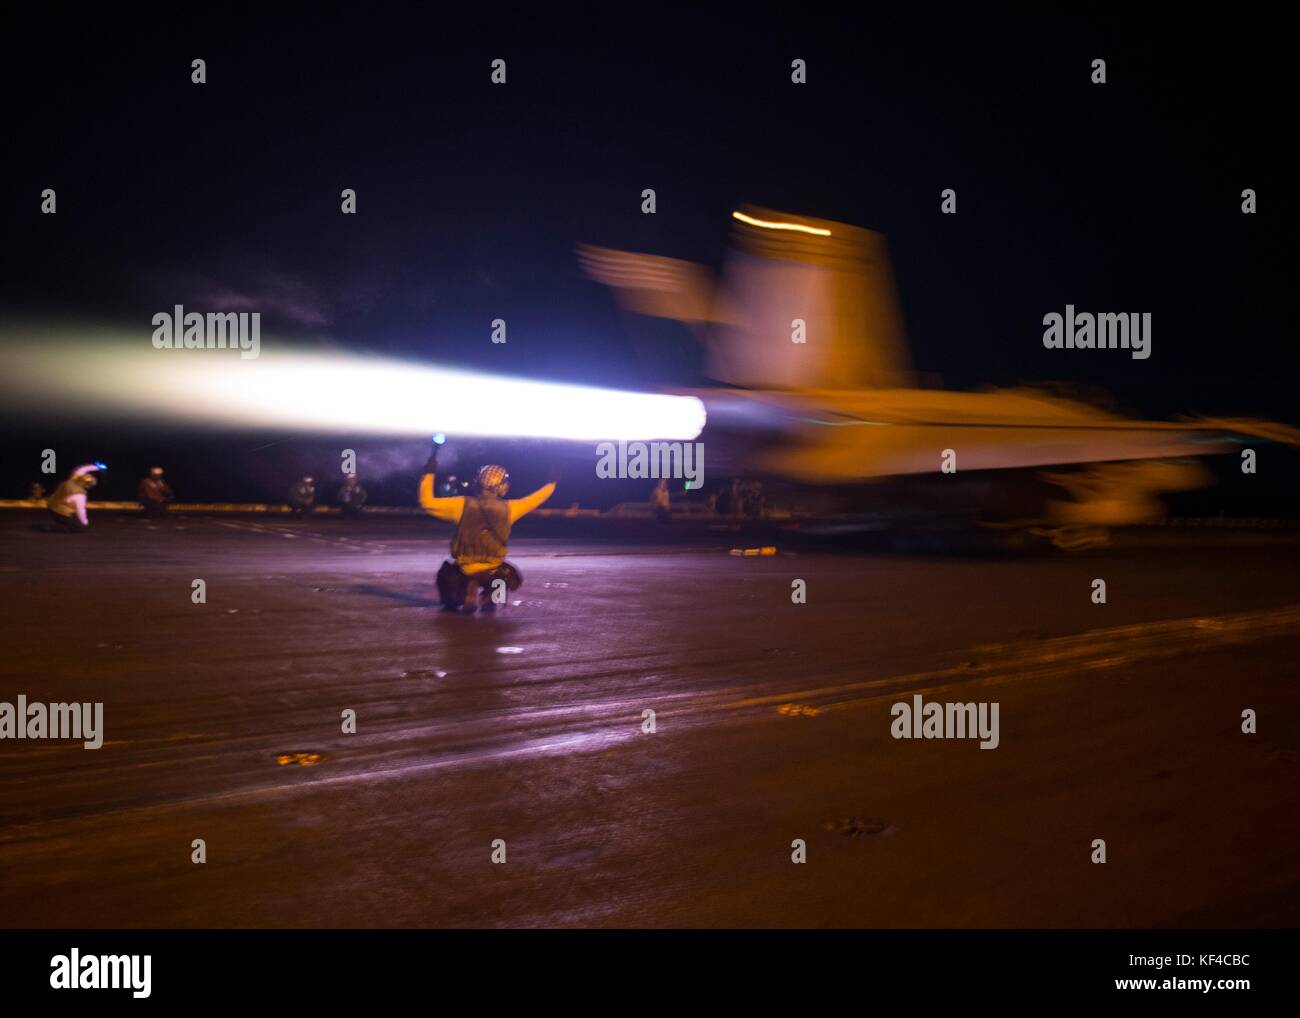 A U.S. Navy F/A-18F Super Hornet jet fighter aircraft launches off the flight deck of the U.S. Navy Nimitz-class aircraft carrier USS Nimitz at night October 5, 2017 in the Arabian Gulf. Stock Photo